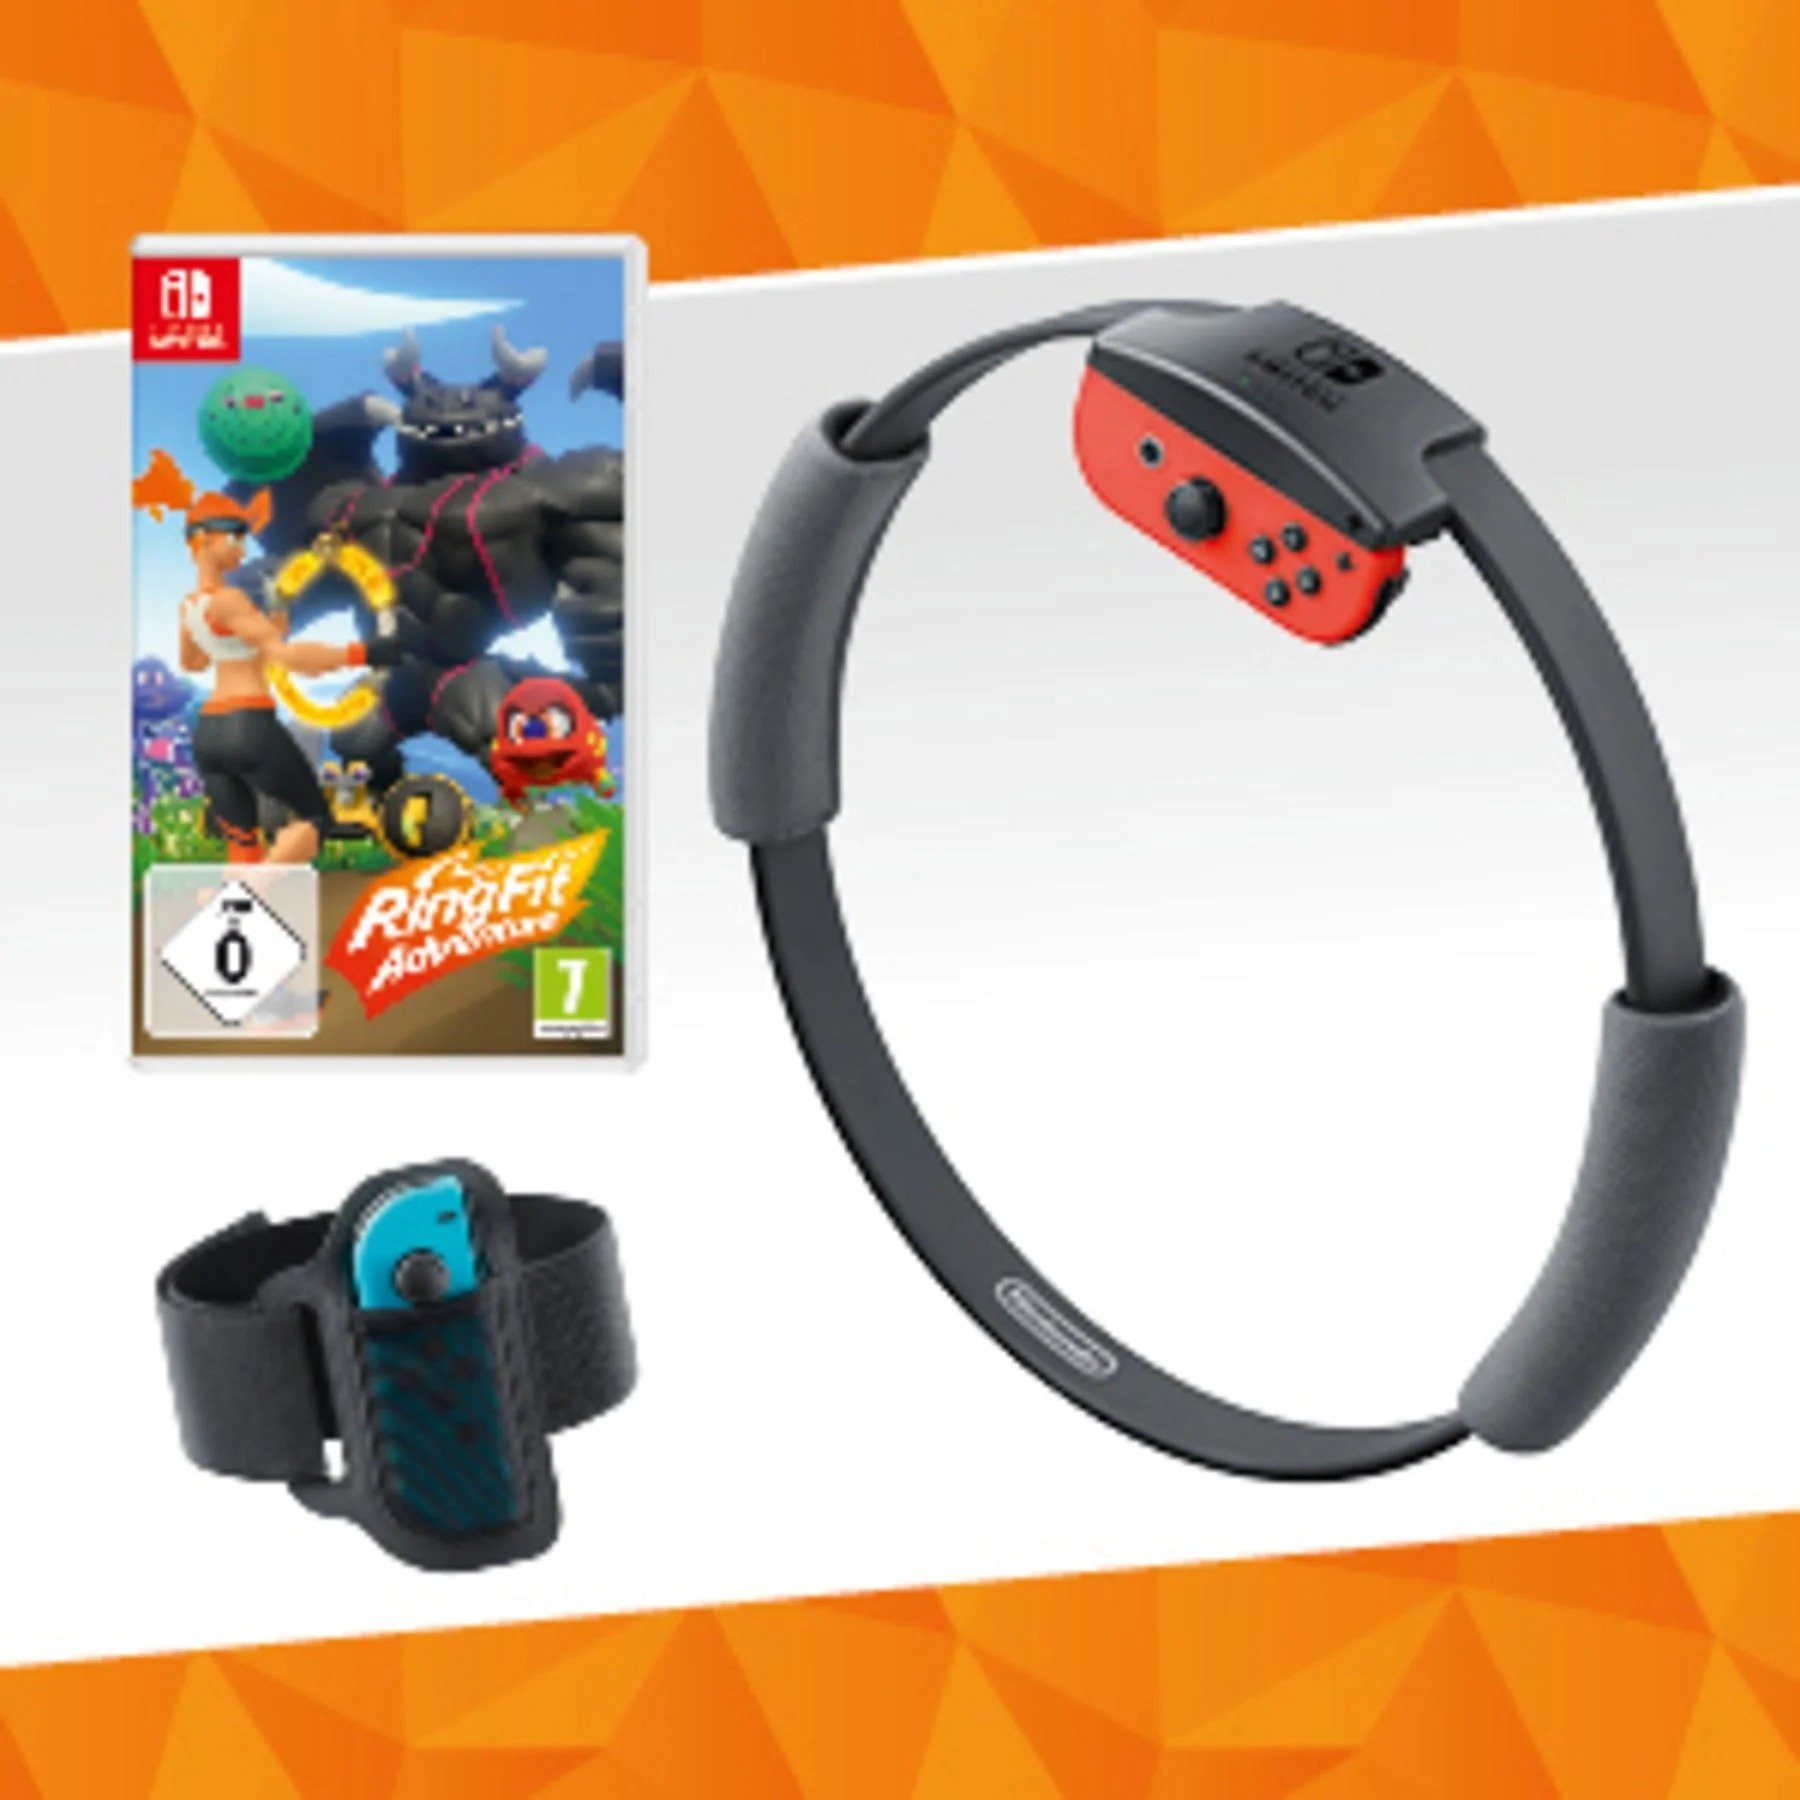 Adventure & Ring inkl. Spiel. Switch-Controller Fit Switch Beingurt Nintendo Ring-Con